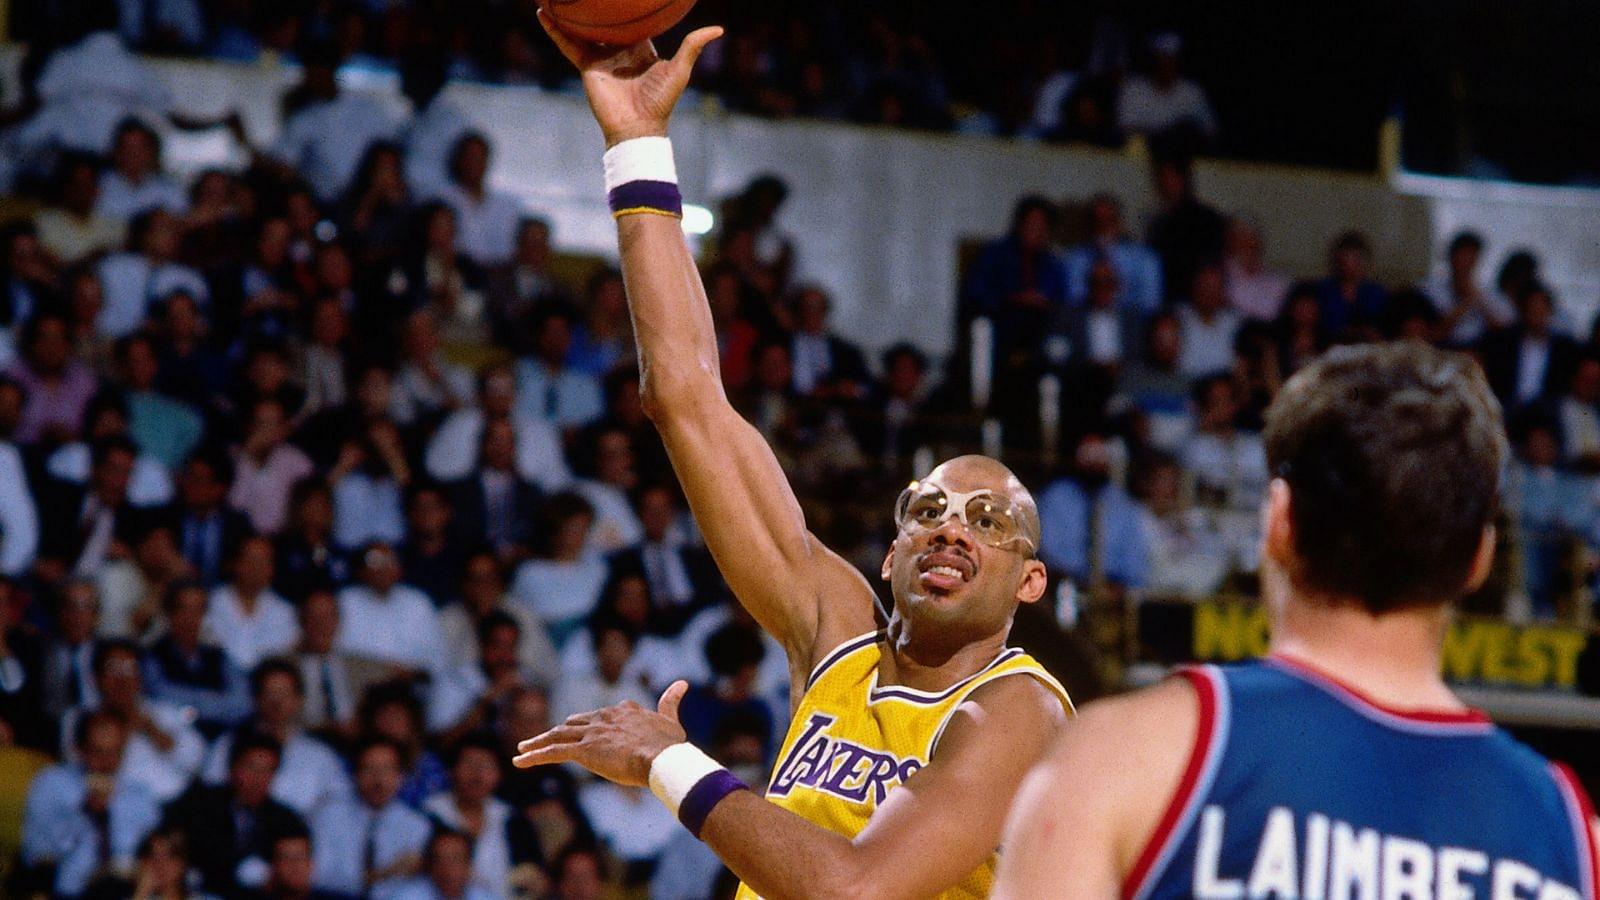 "The Skyhook is out of style, out of the game!": Kareem Abdul-Jabbar speaks about why no body uses his "Unstoppable" shot anymore